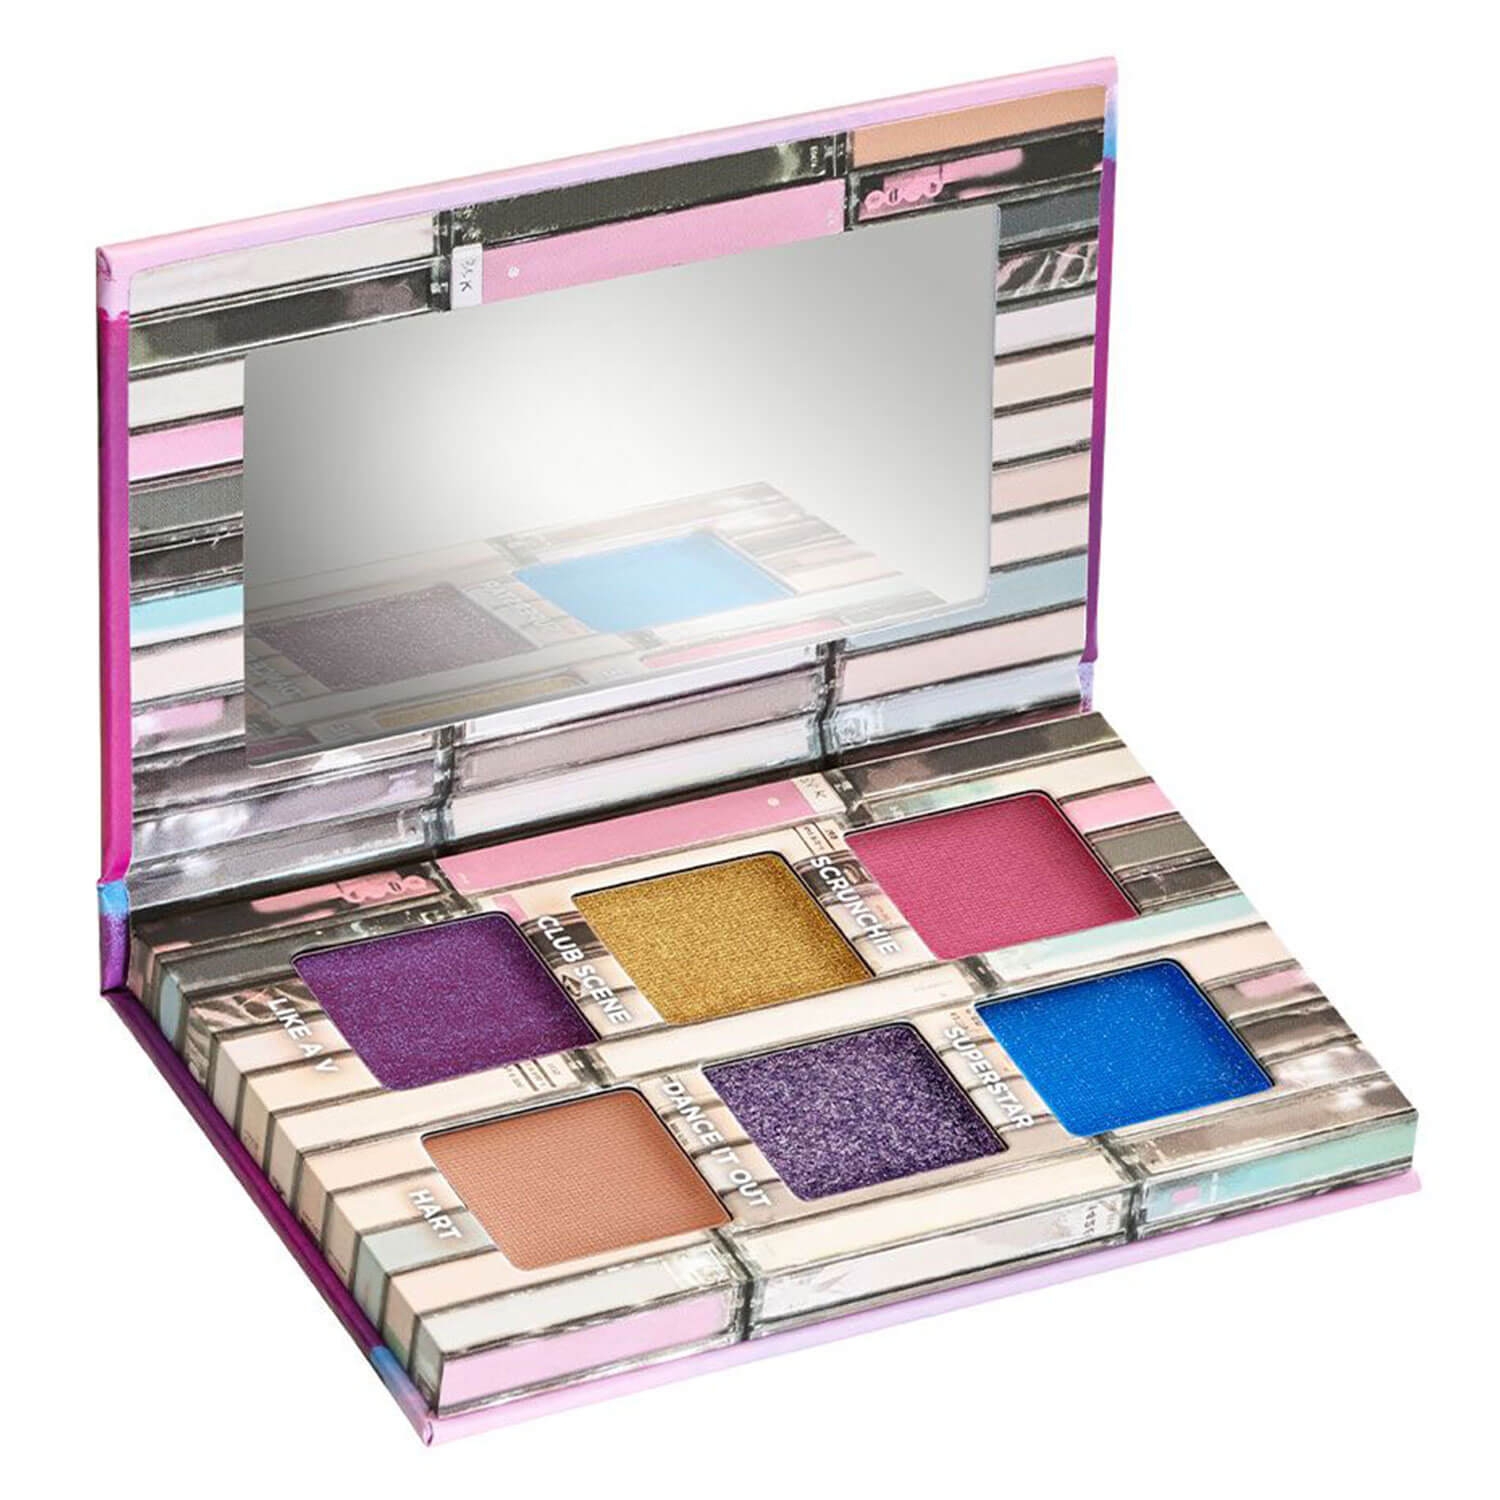 Product image from Decades - 80s Pop Queen Mini Eyeshadow Palette